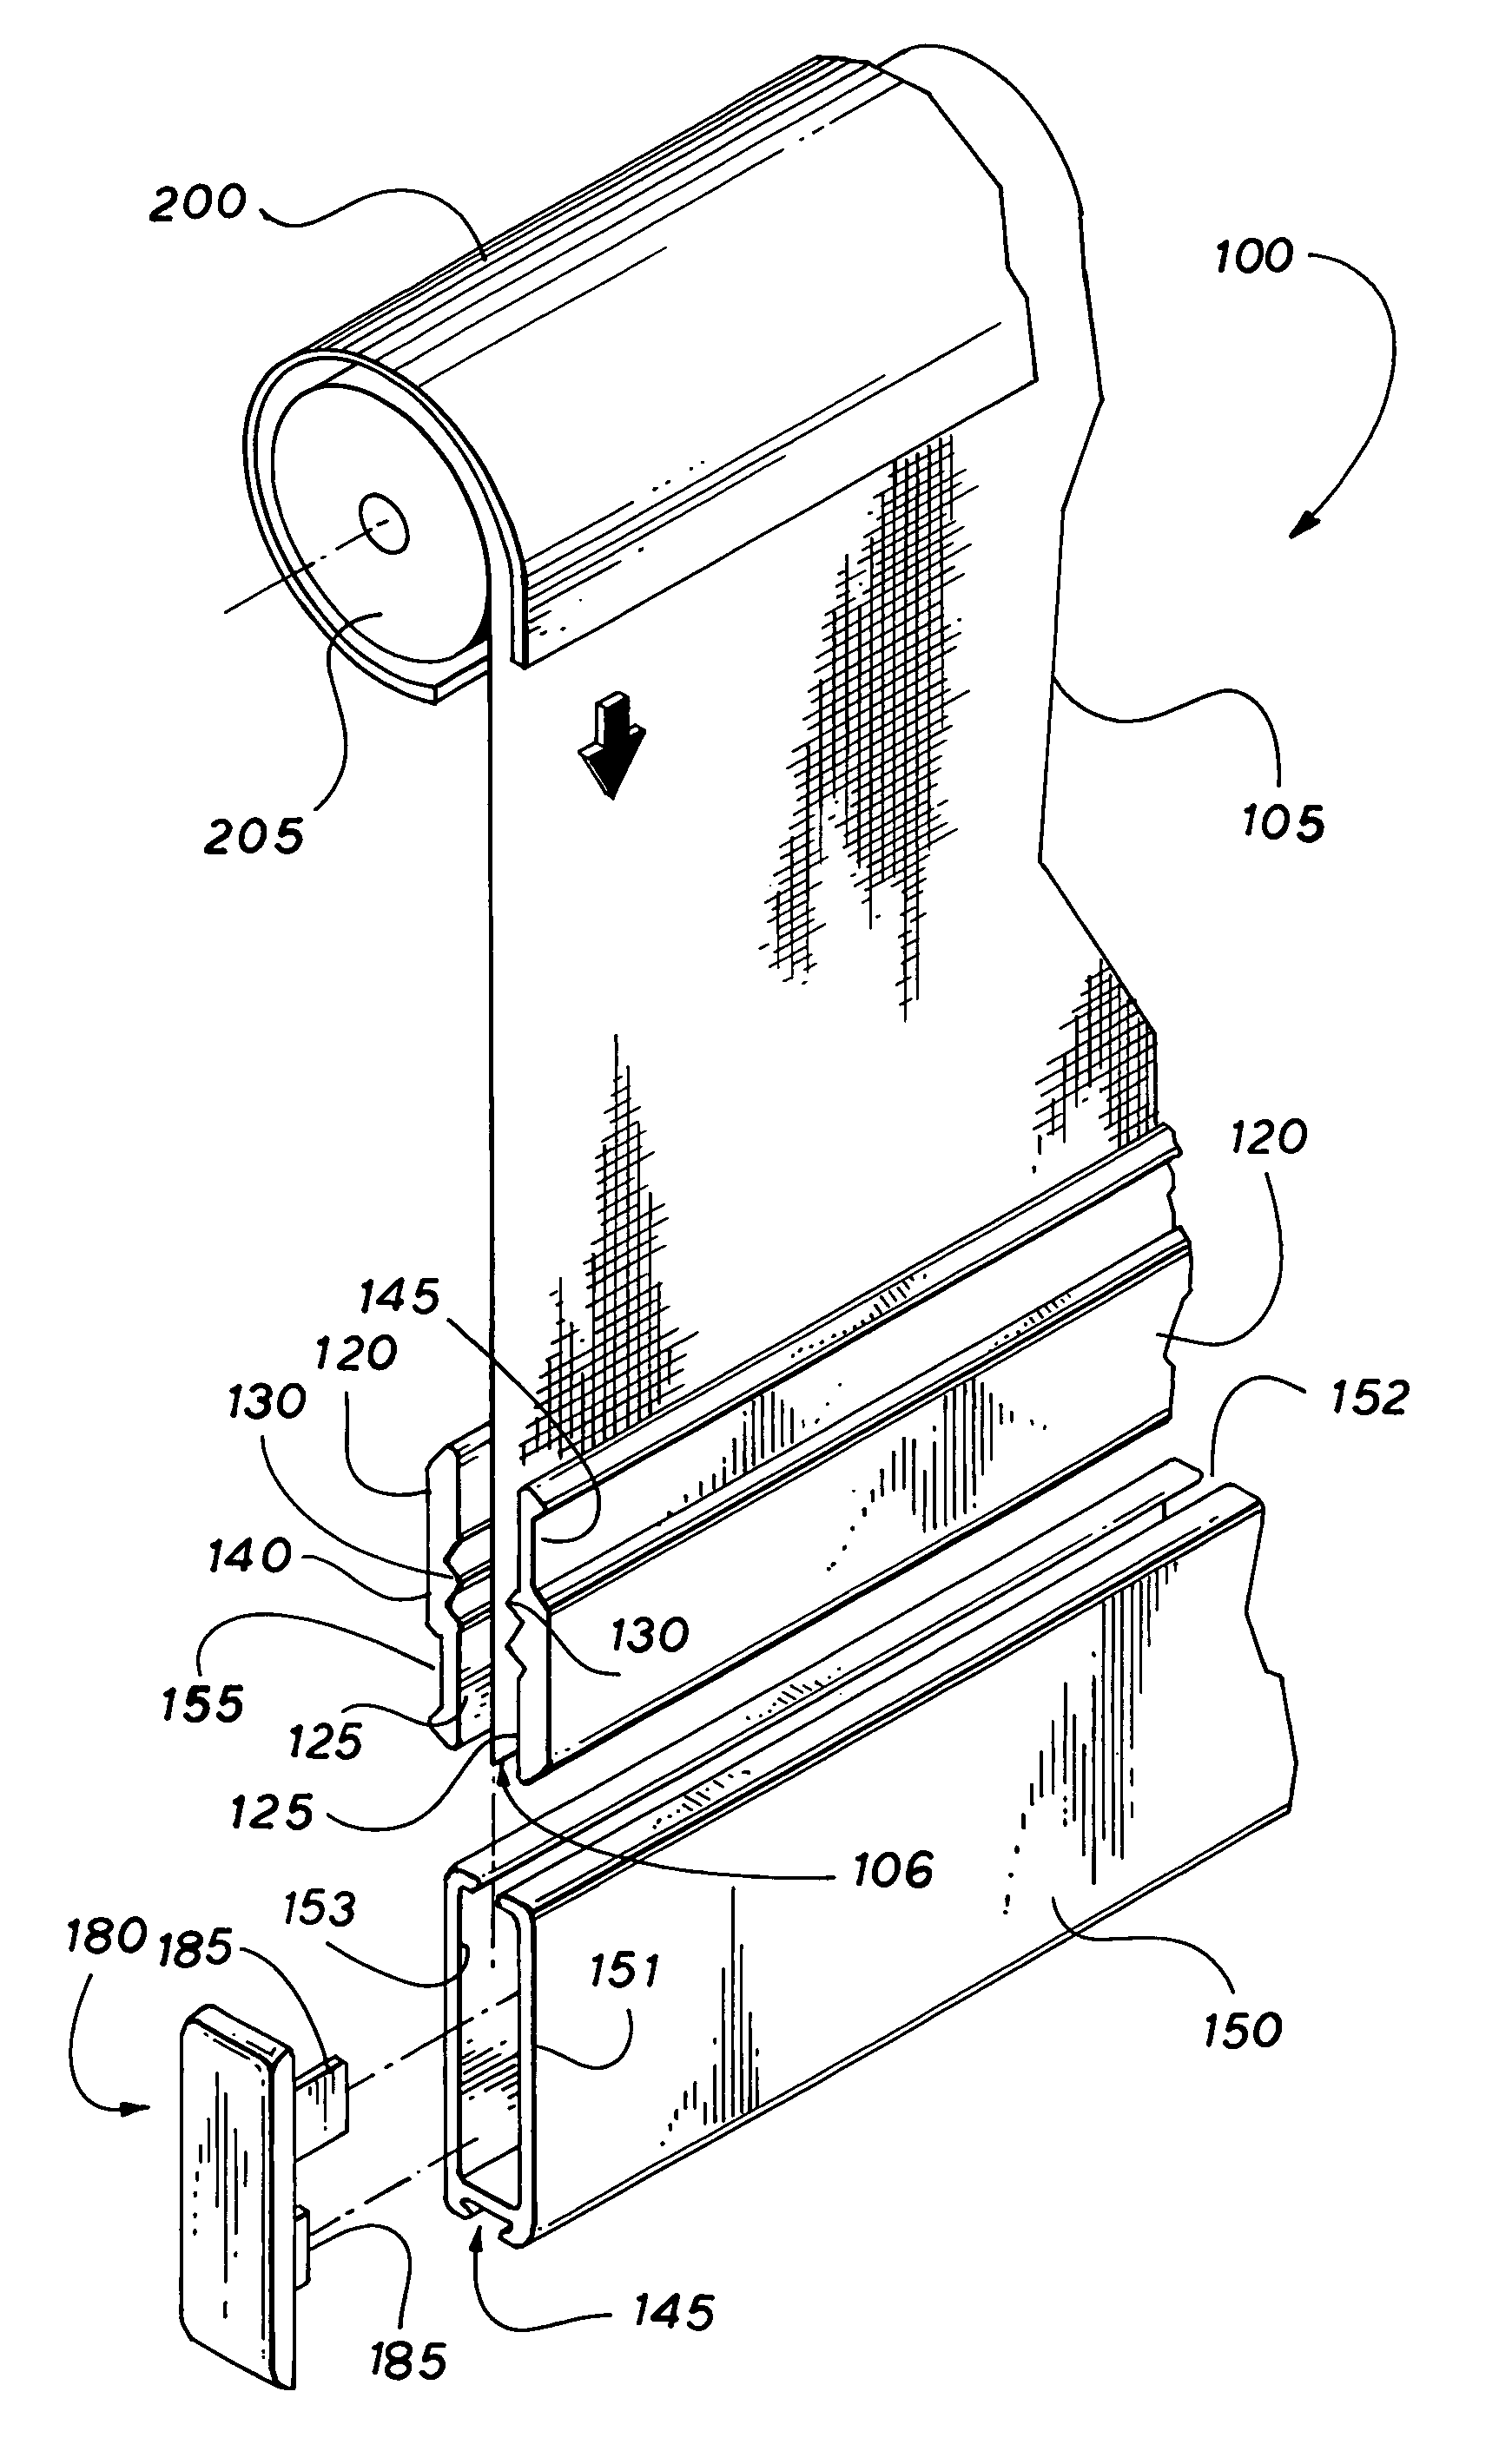 Pull bar screen apparatus and system